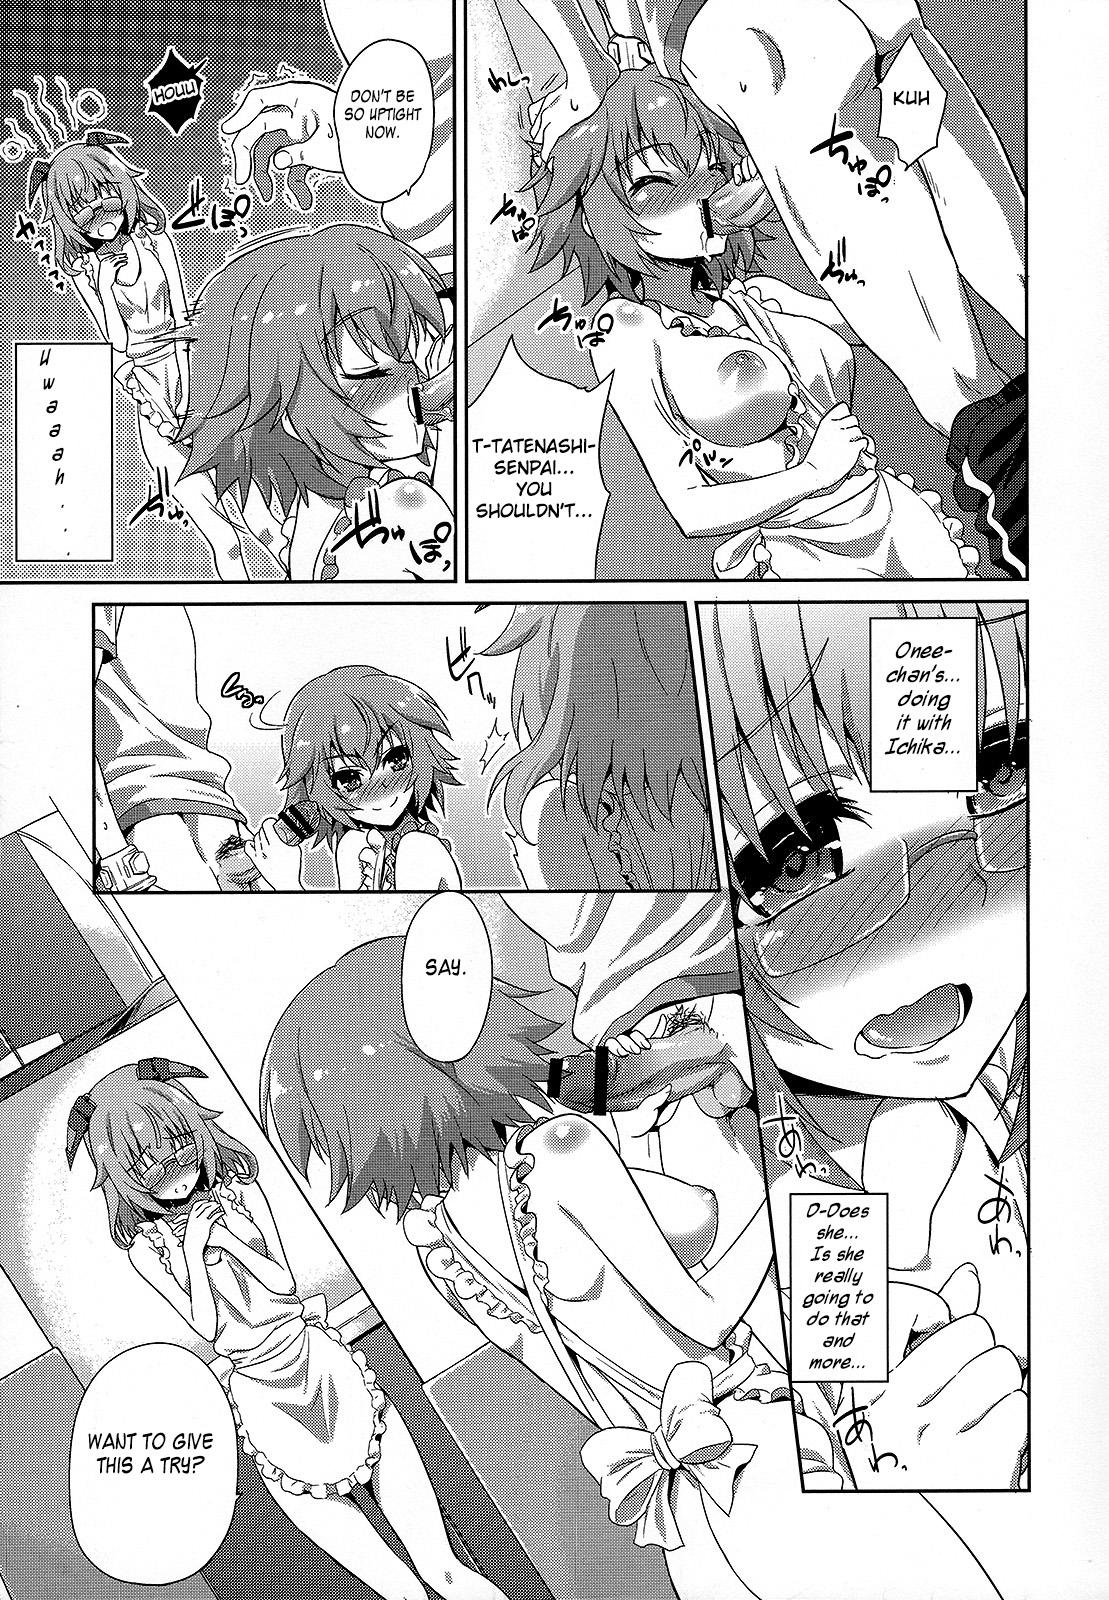 Flogging IS ICHIKA LOVE SISTERS!! - Infinite stratos Glamour - Page 6